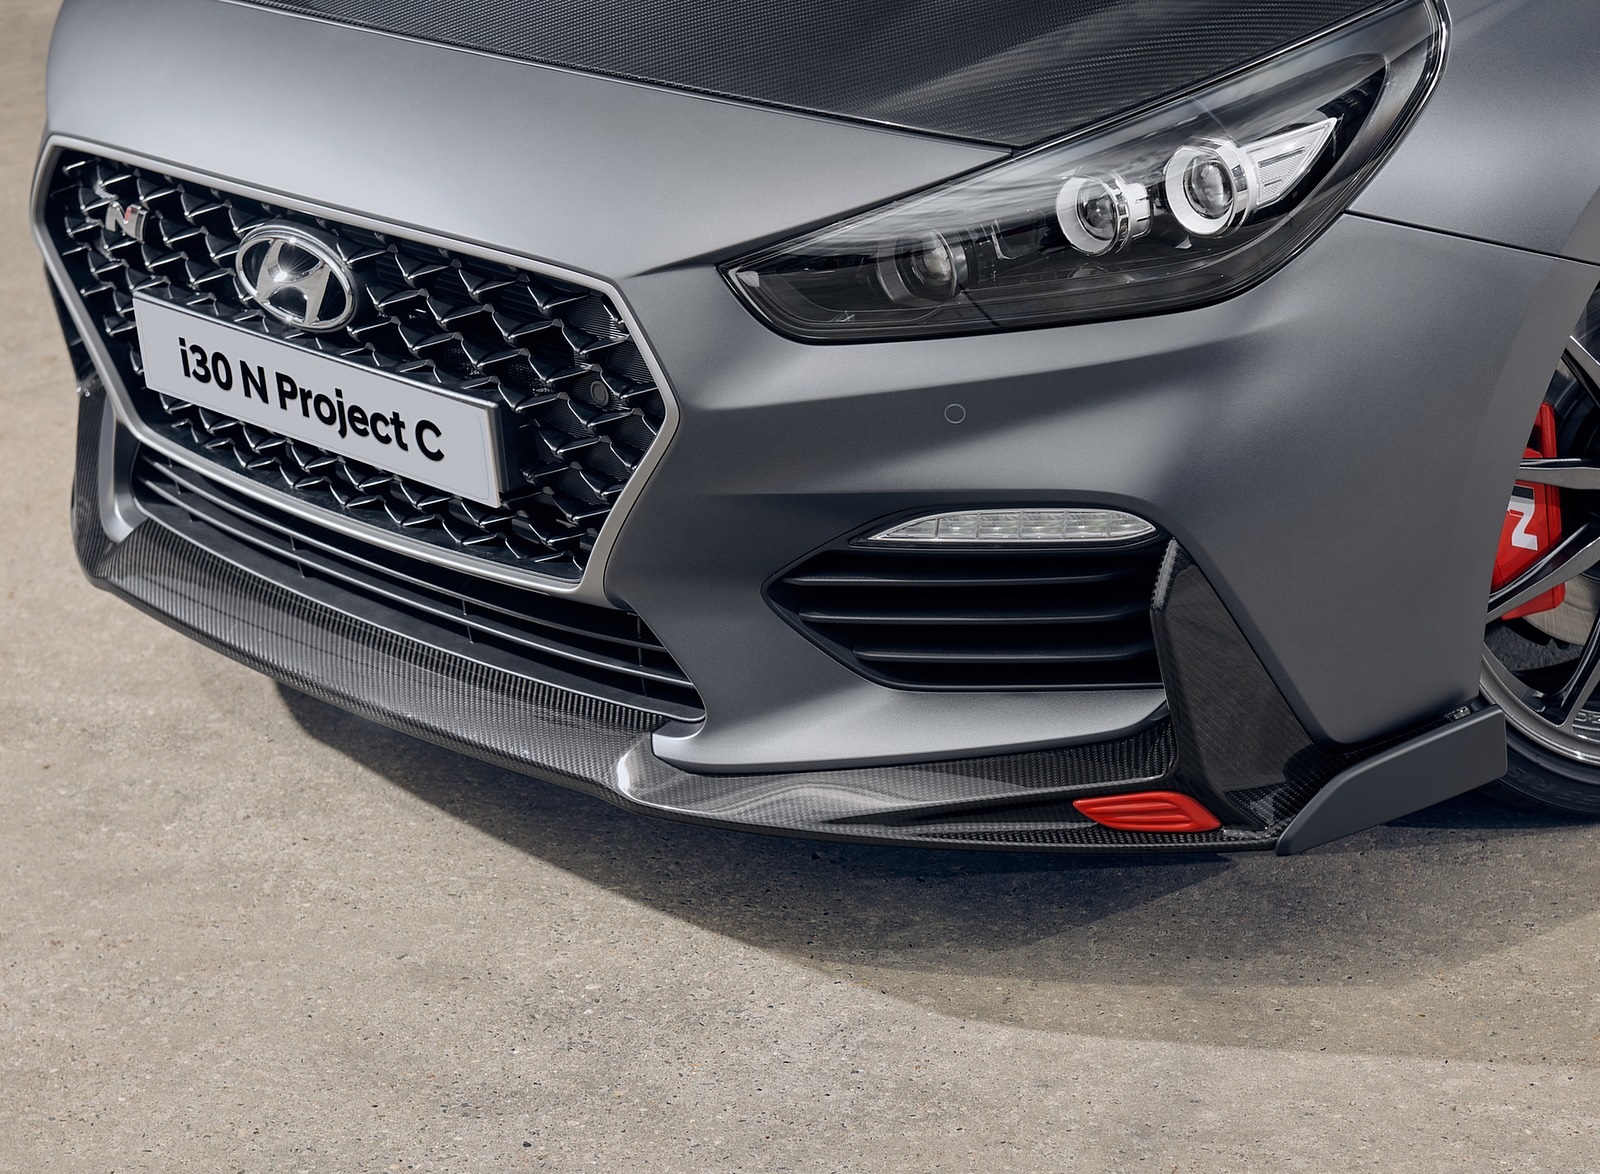 2020 Hyundai i30 N Project C Detail Wallpapers #18 of 31